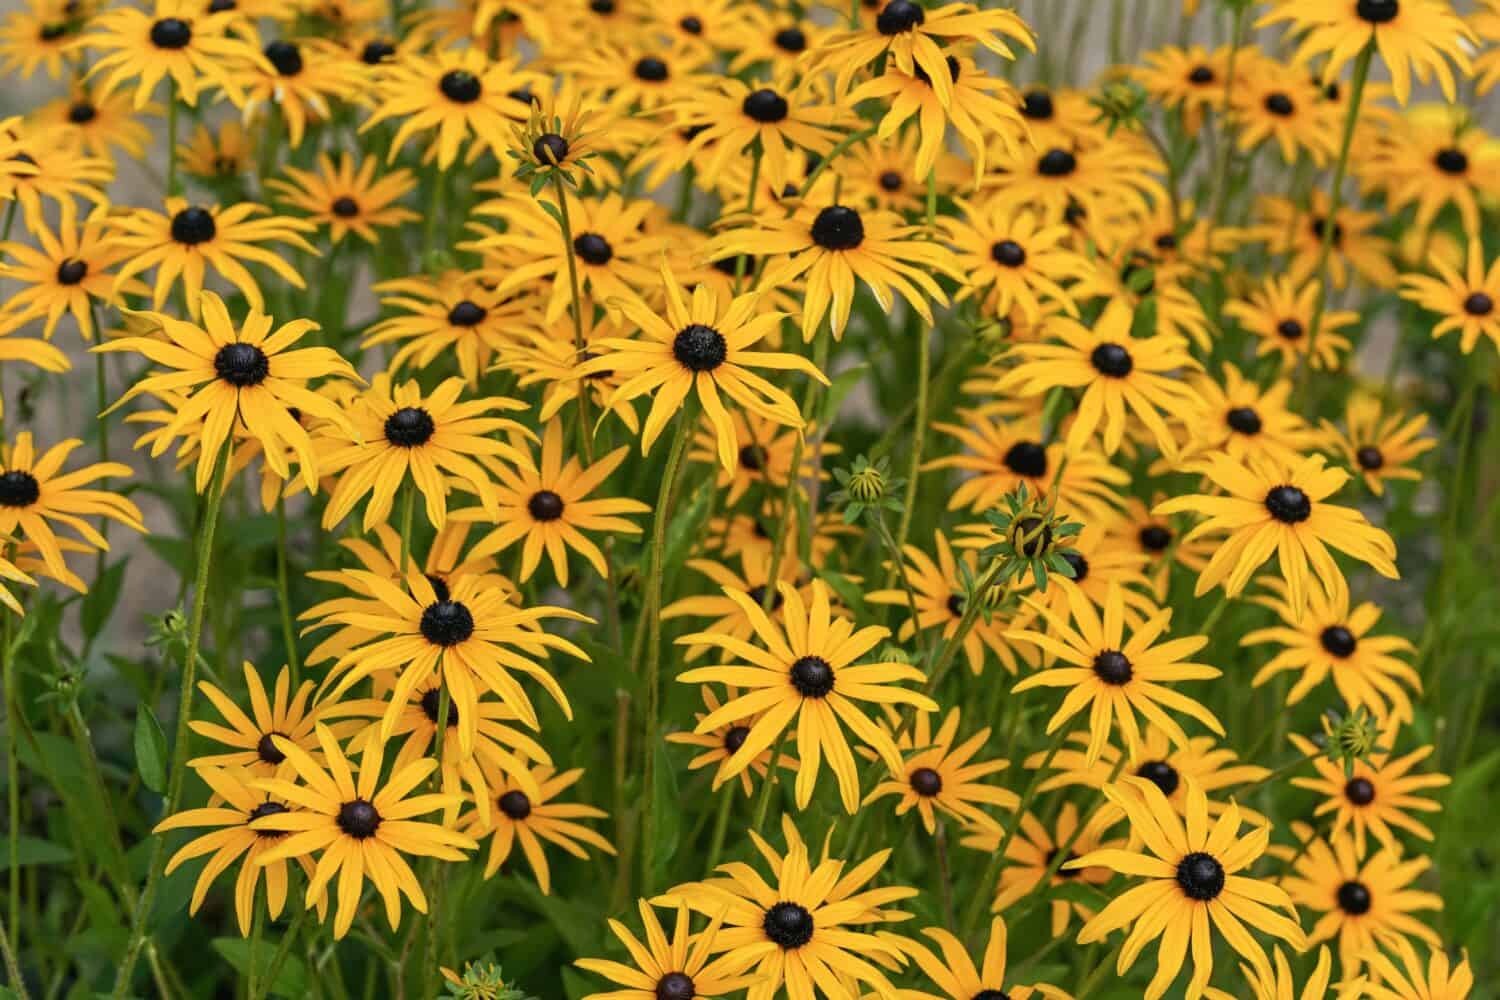 15 Black Perennial Flowers to Plant in Your Garden